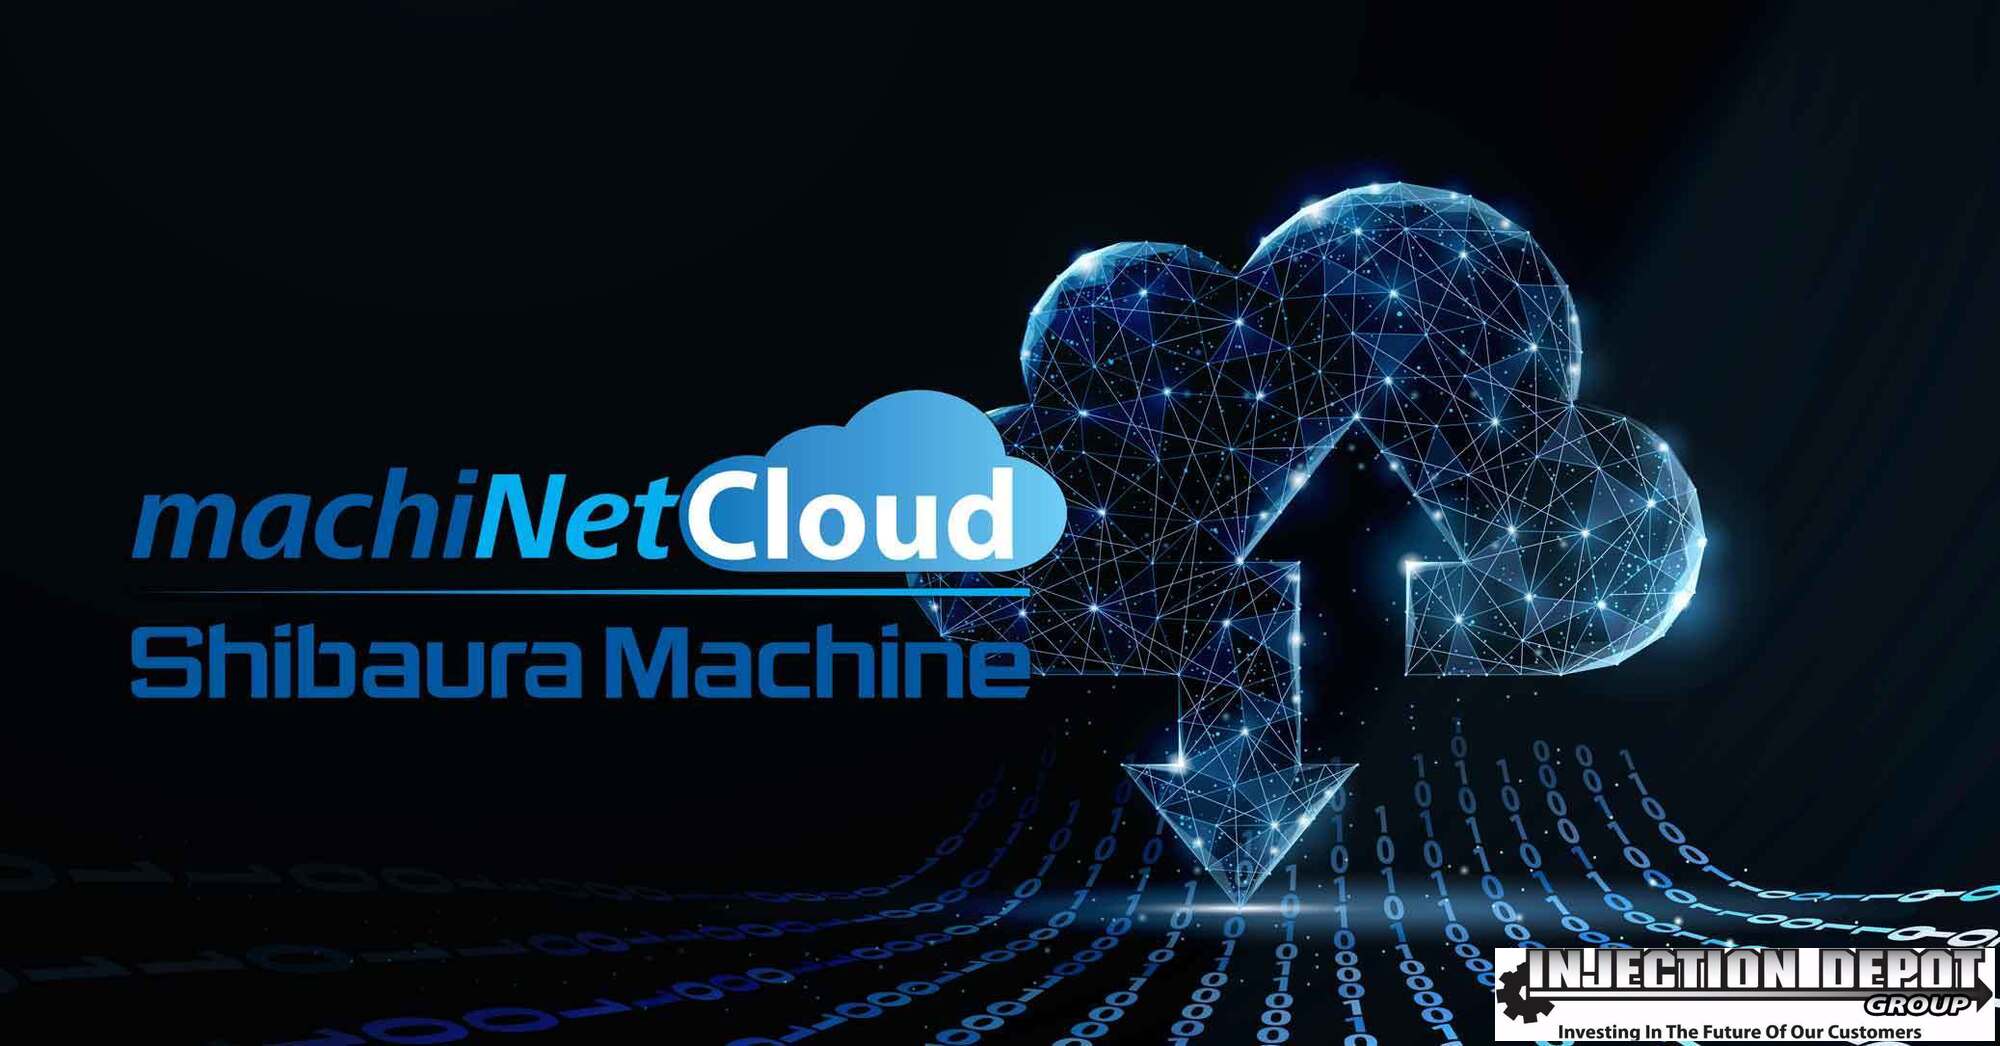 Shibaura Machine machiNetCloud 4.0 The Industrial Internet of Things (IIoT) Industry 4.0 | INJECTION DEPOT GROUP